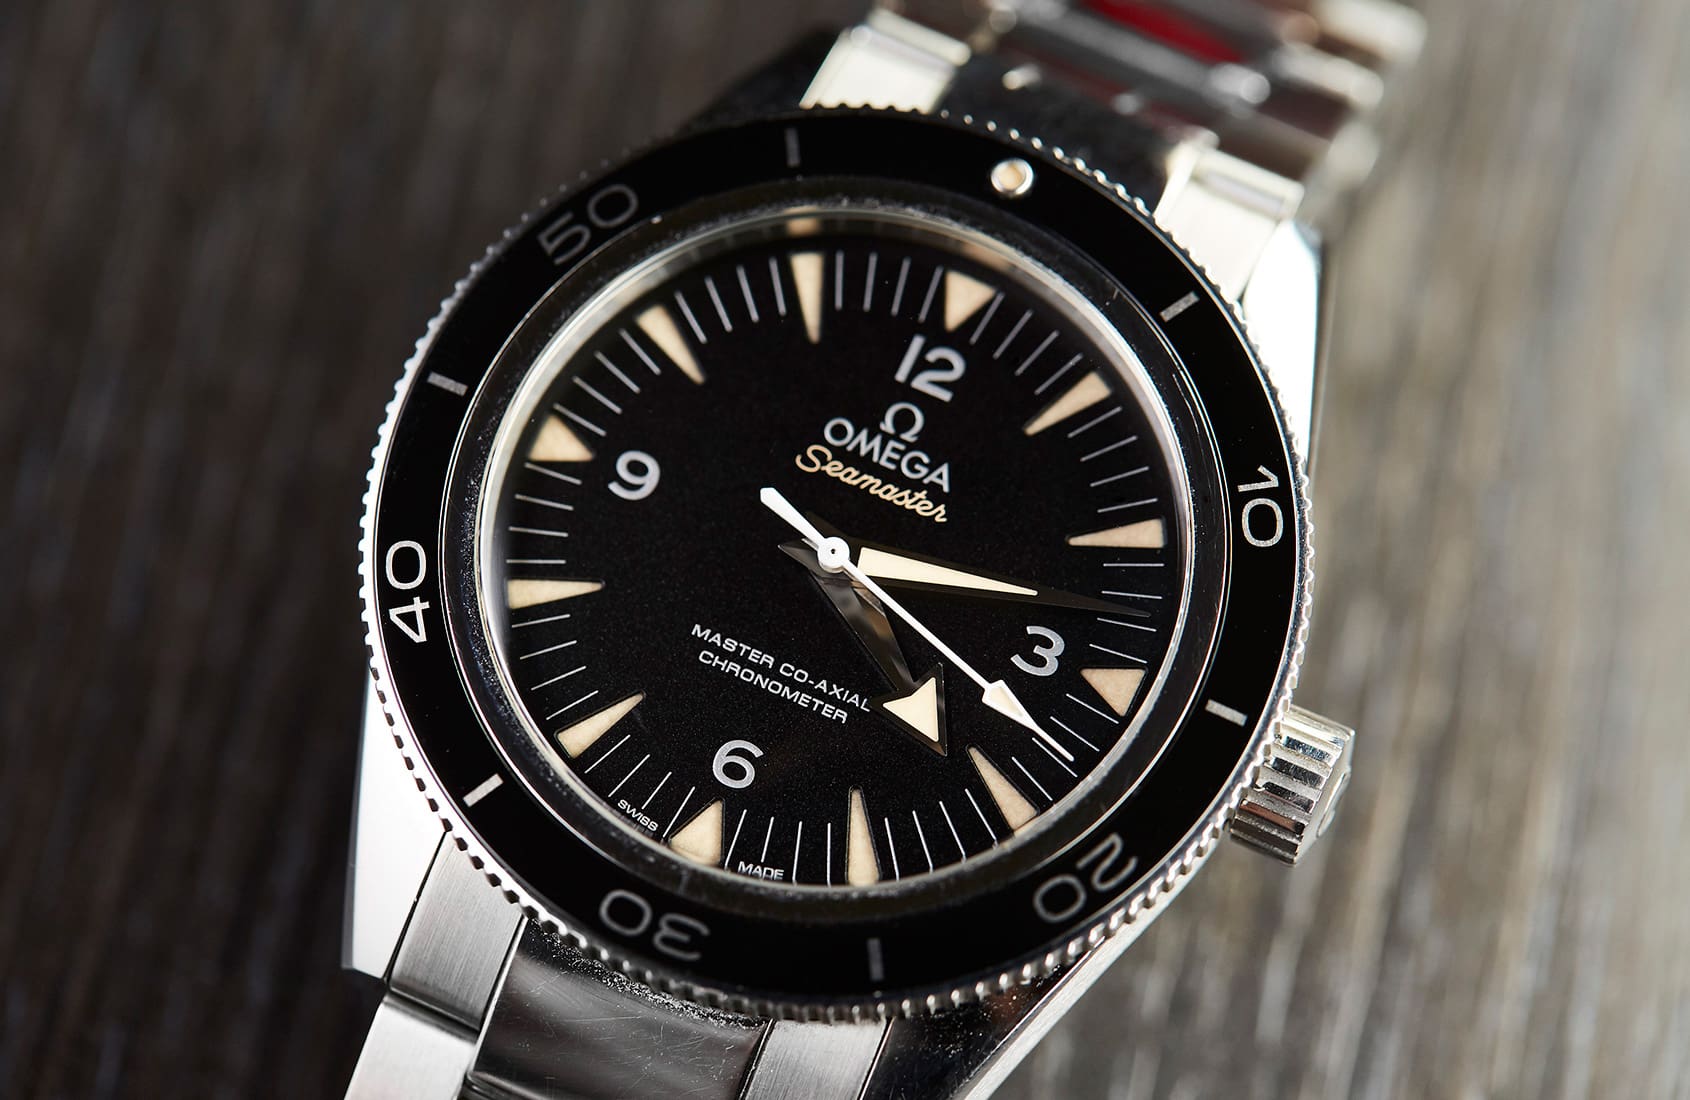 Spending a month with a beaten-up Omega Seamaster 300 – a watch that wears its scars proudly